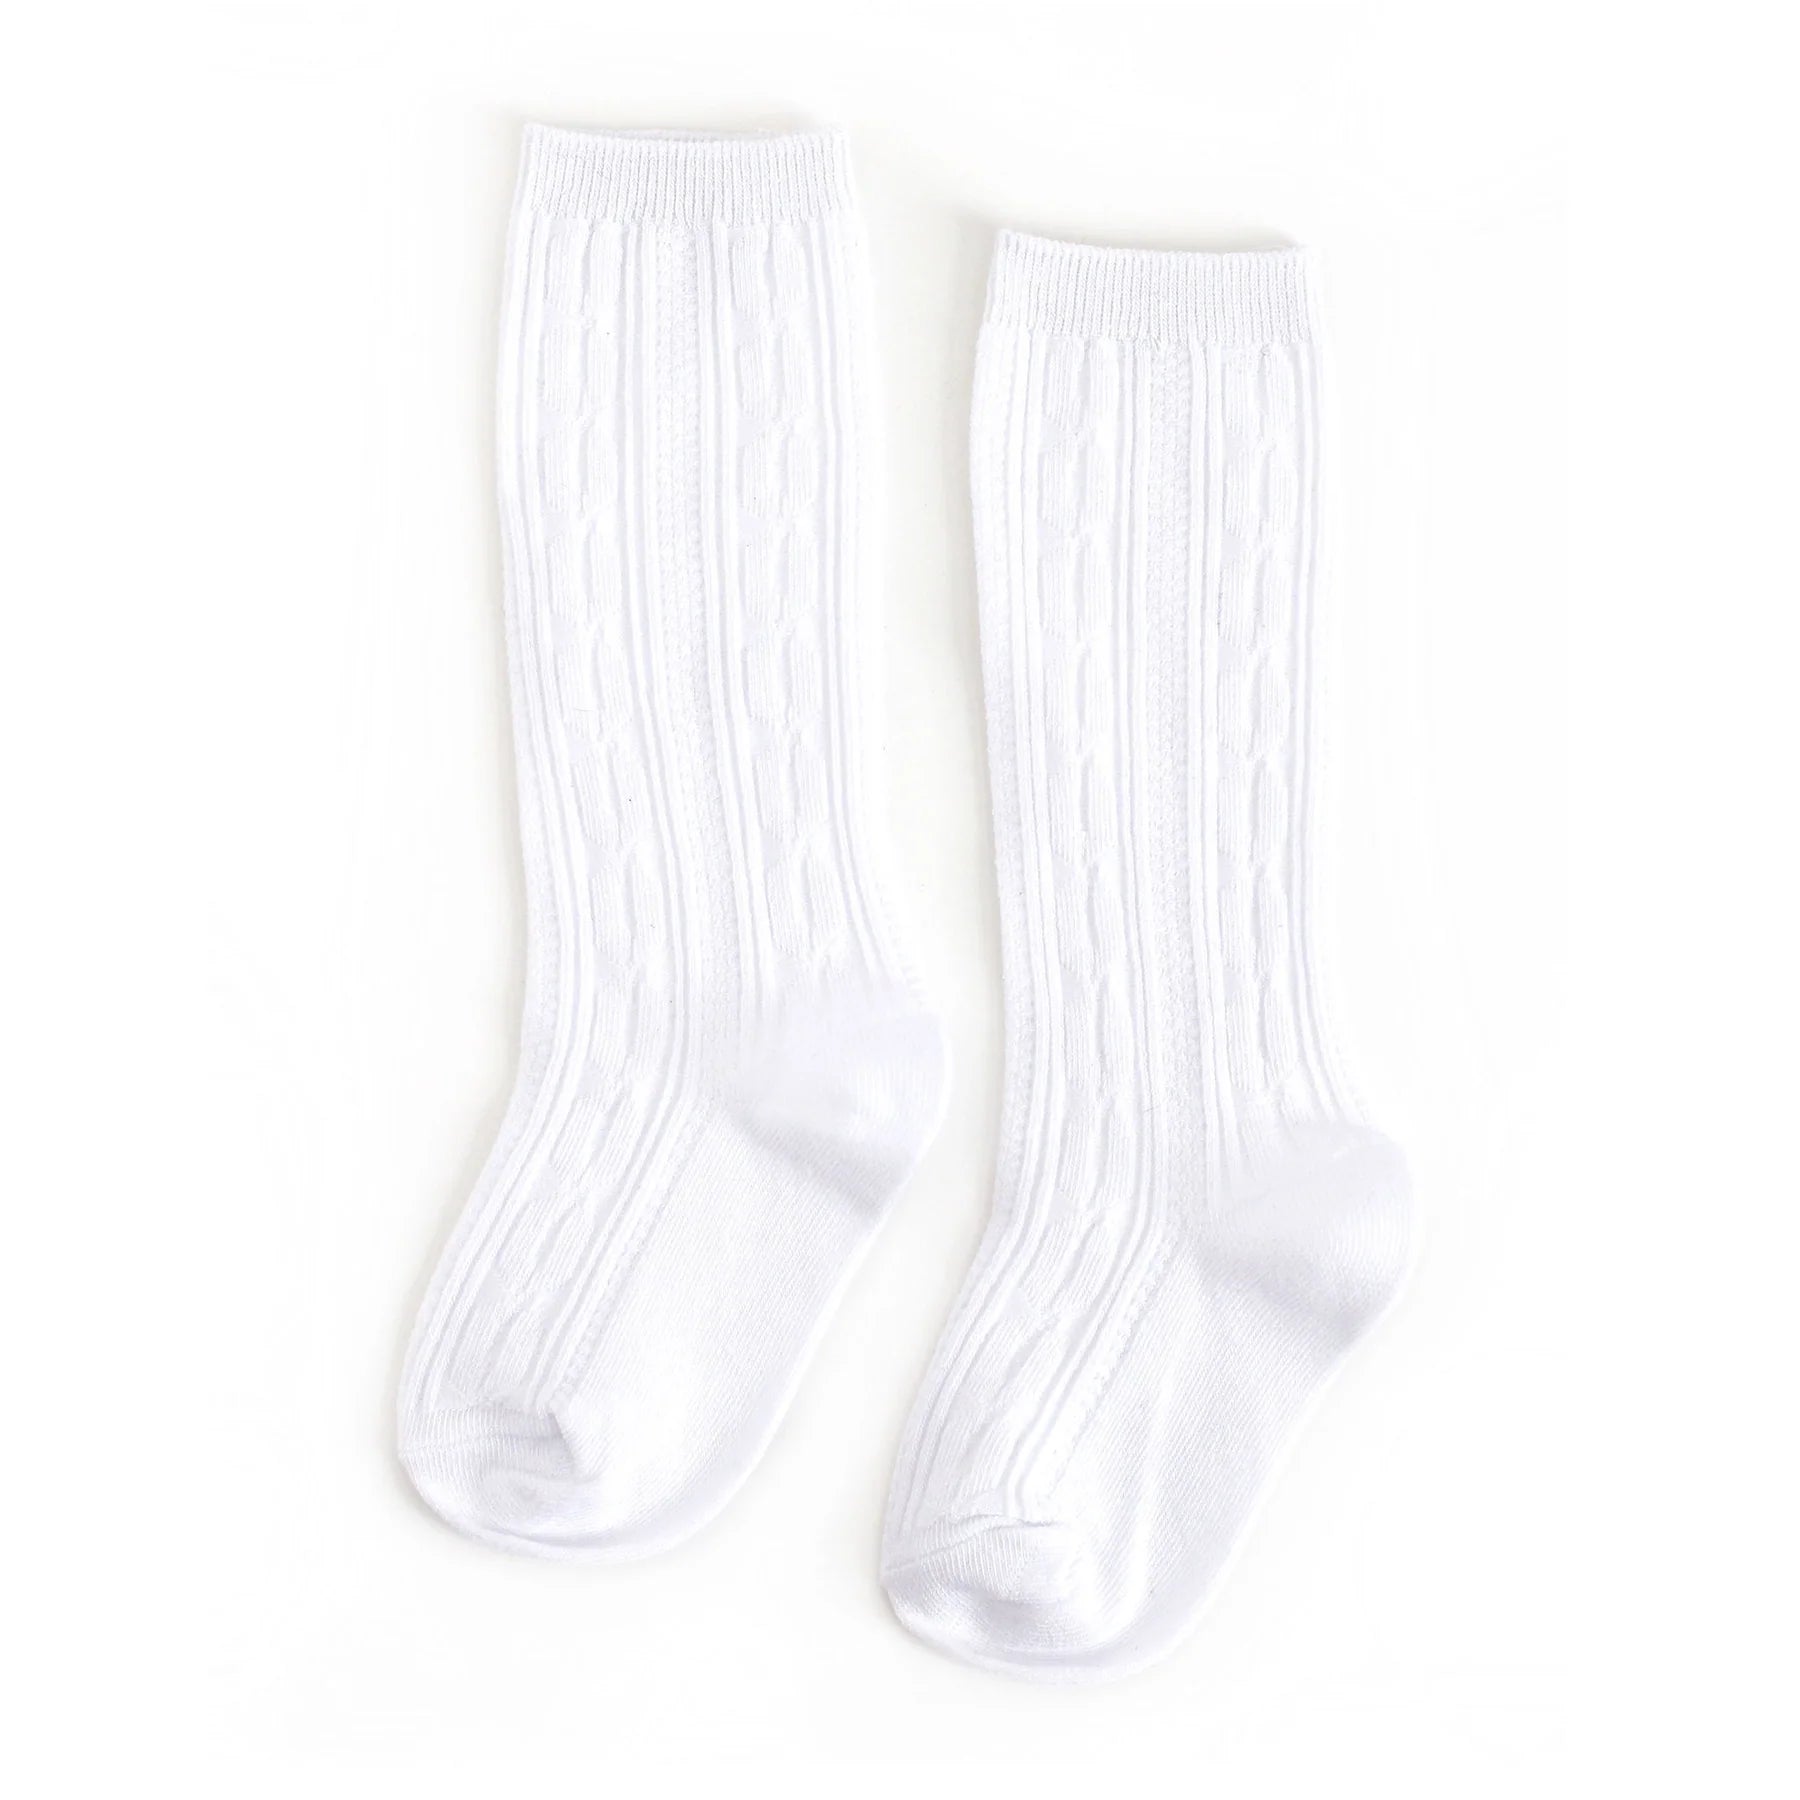 Little Stocking Co. White Cable Knit Knee Highs